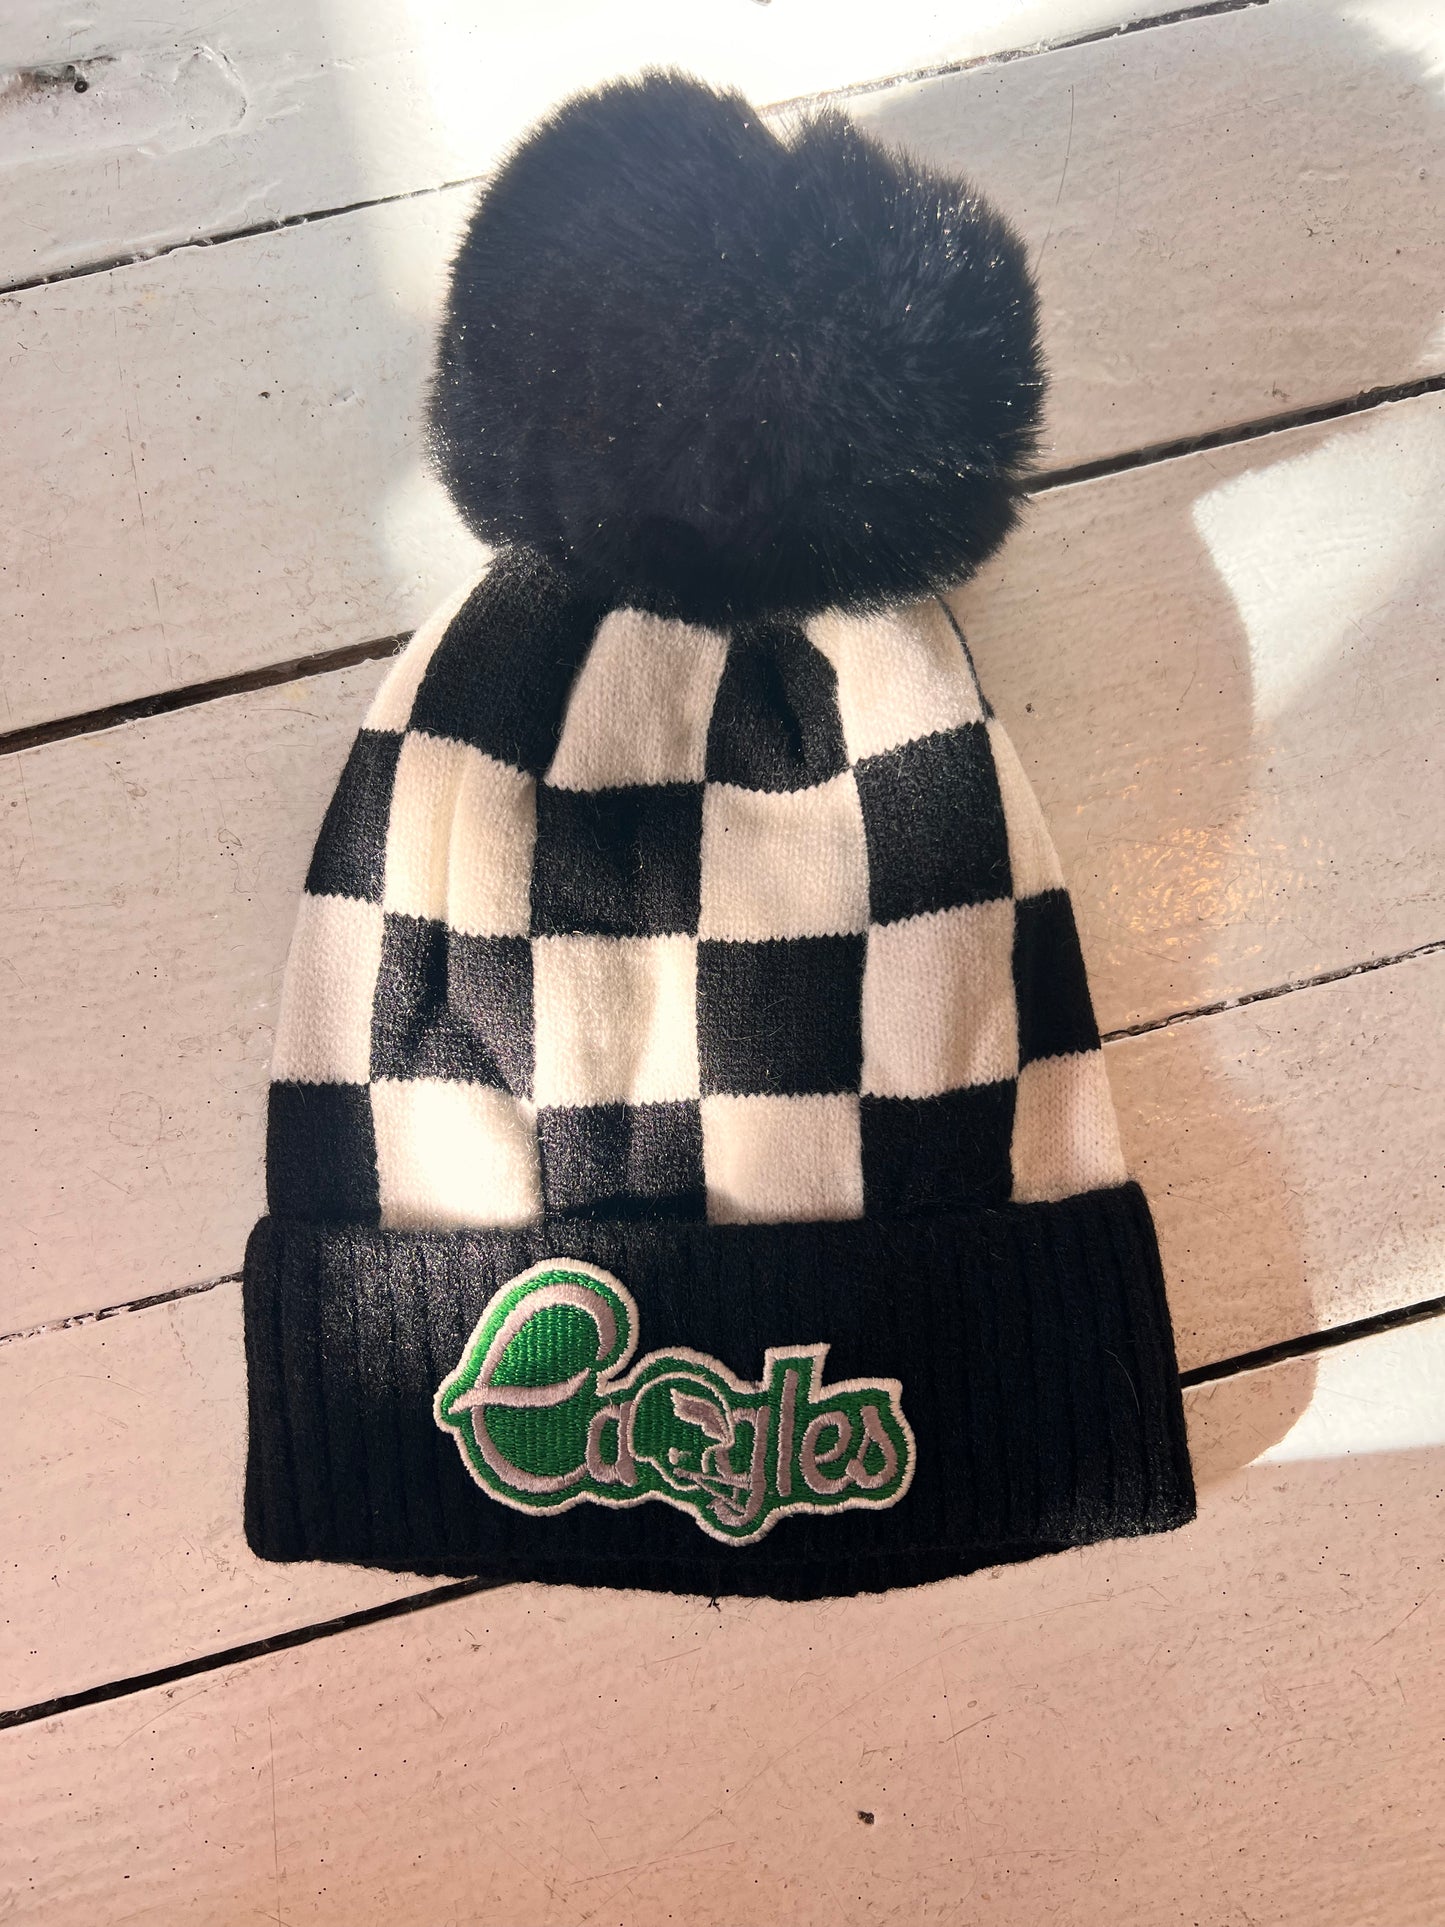 Vintage Eagles patch black and white check beanie